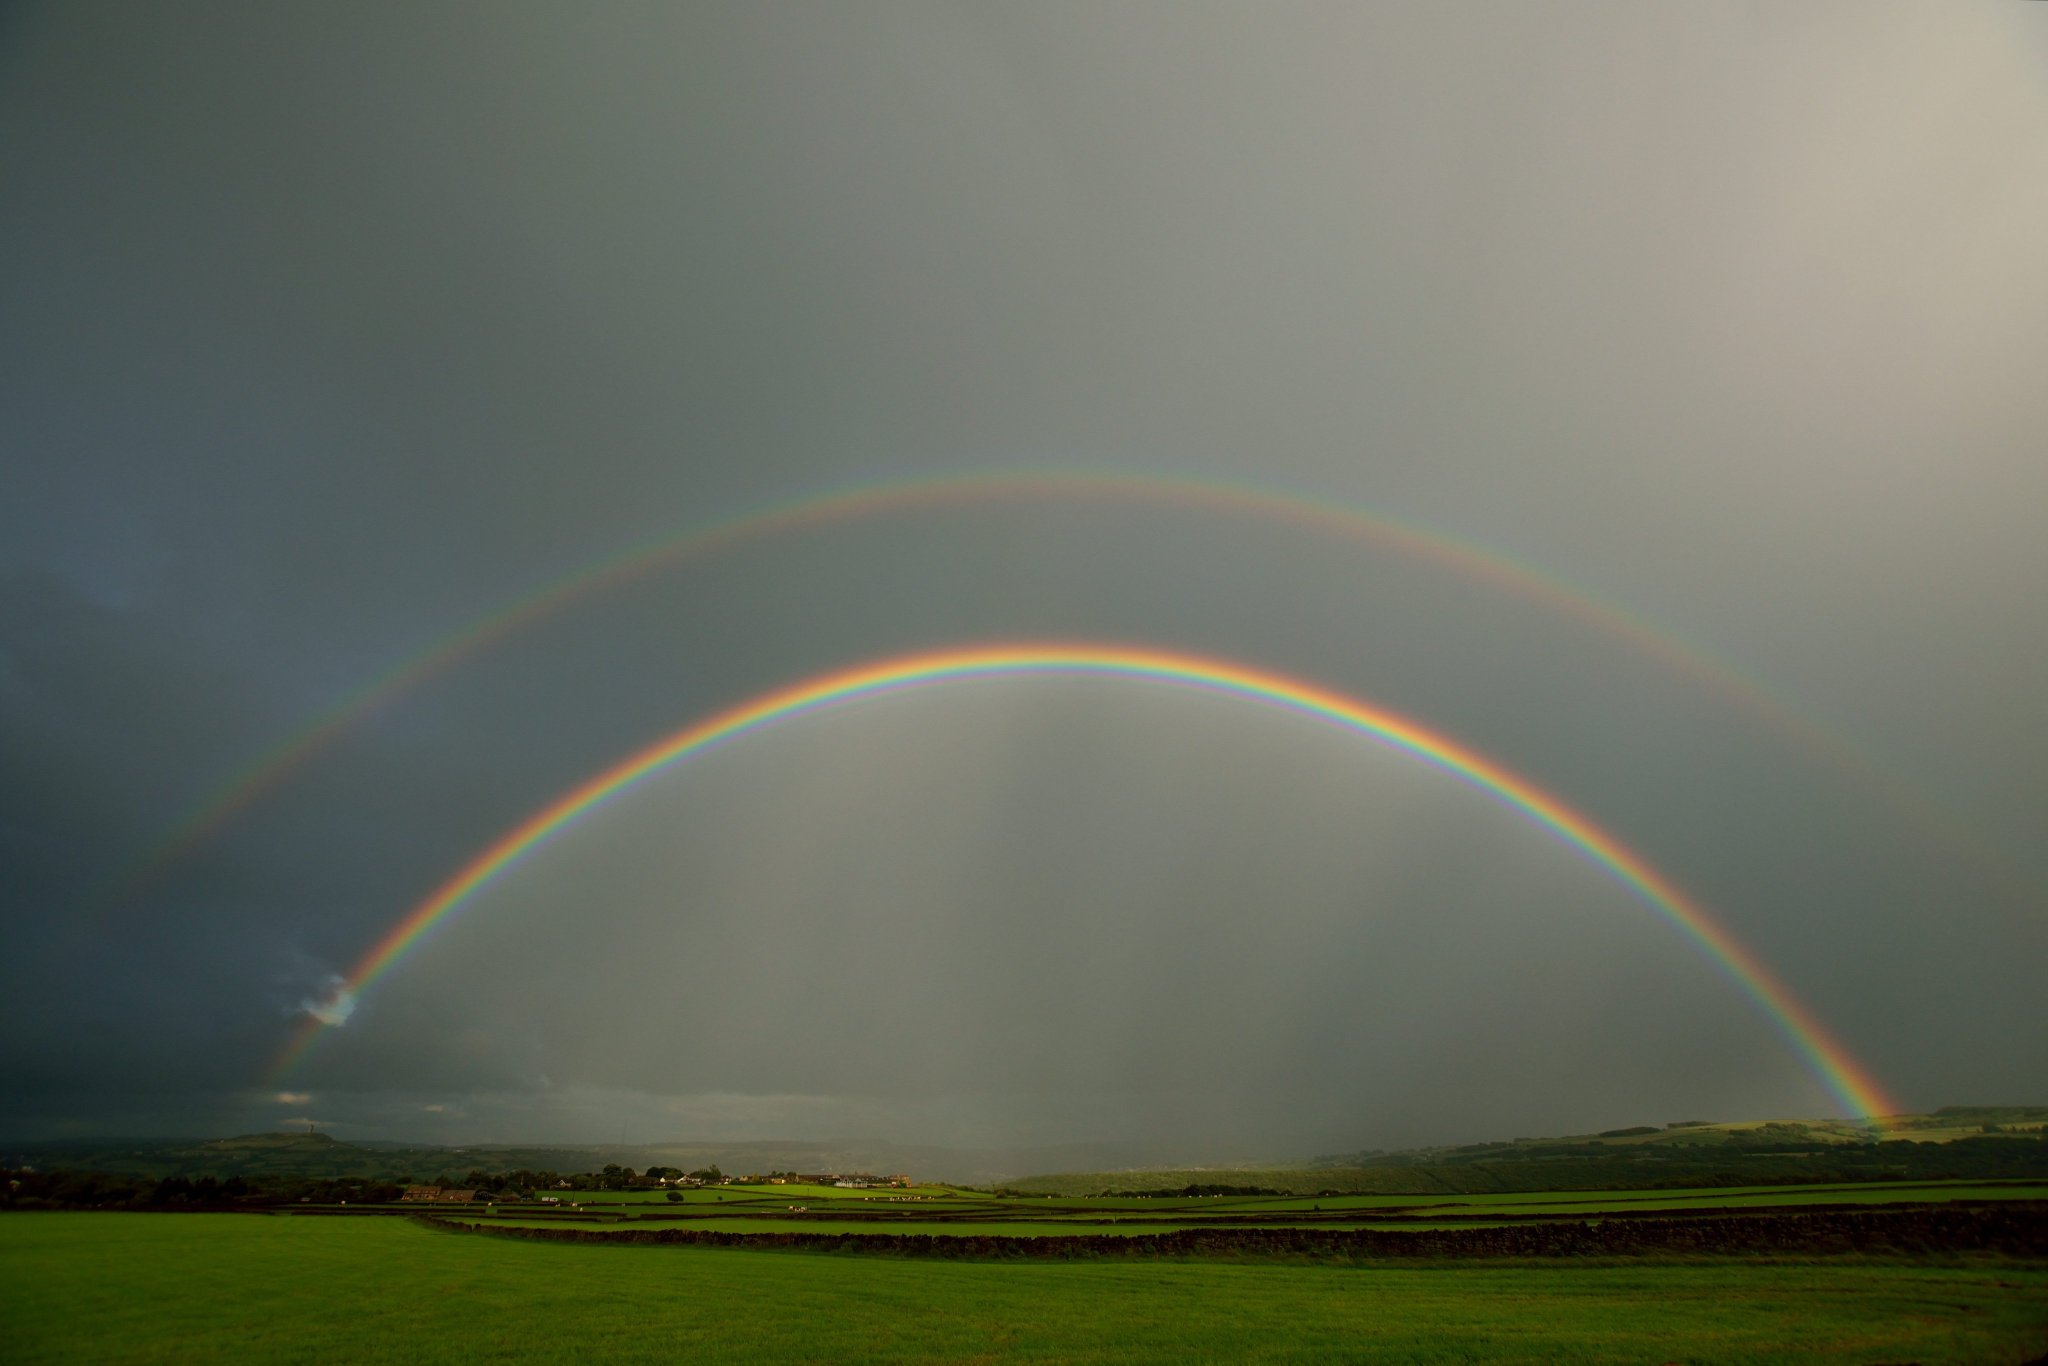 3rd Place Double rainbow in late evening light after a day of sunshine and showers in Huddersfield by Jane Brook @jayceb19